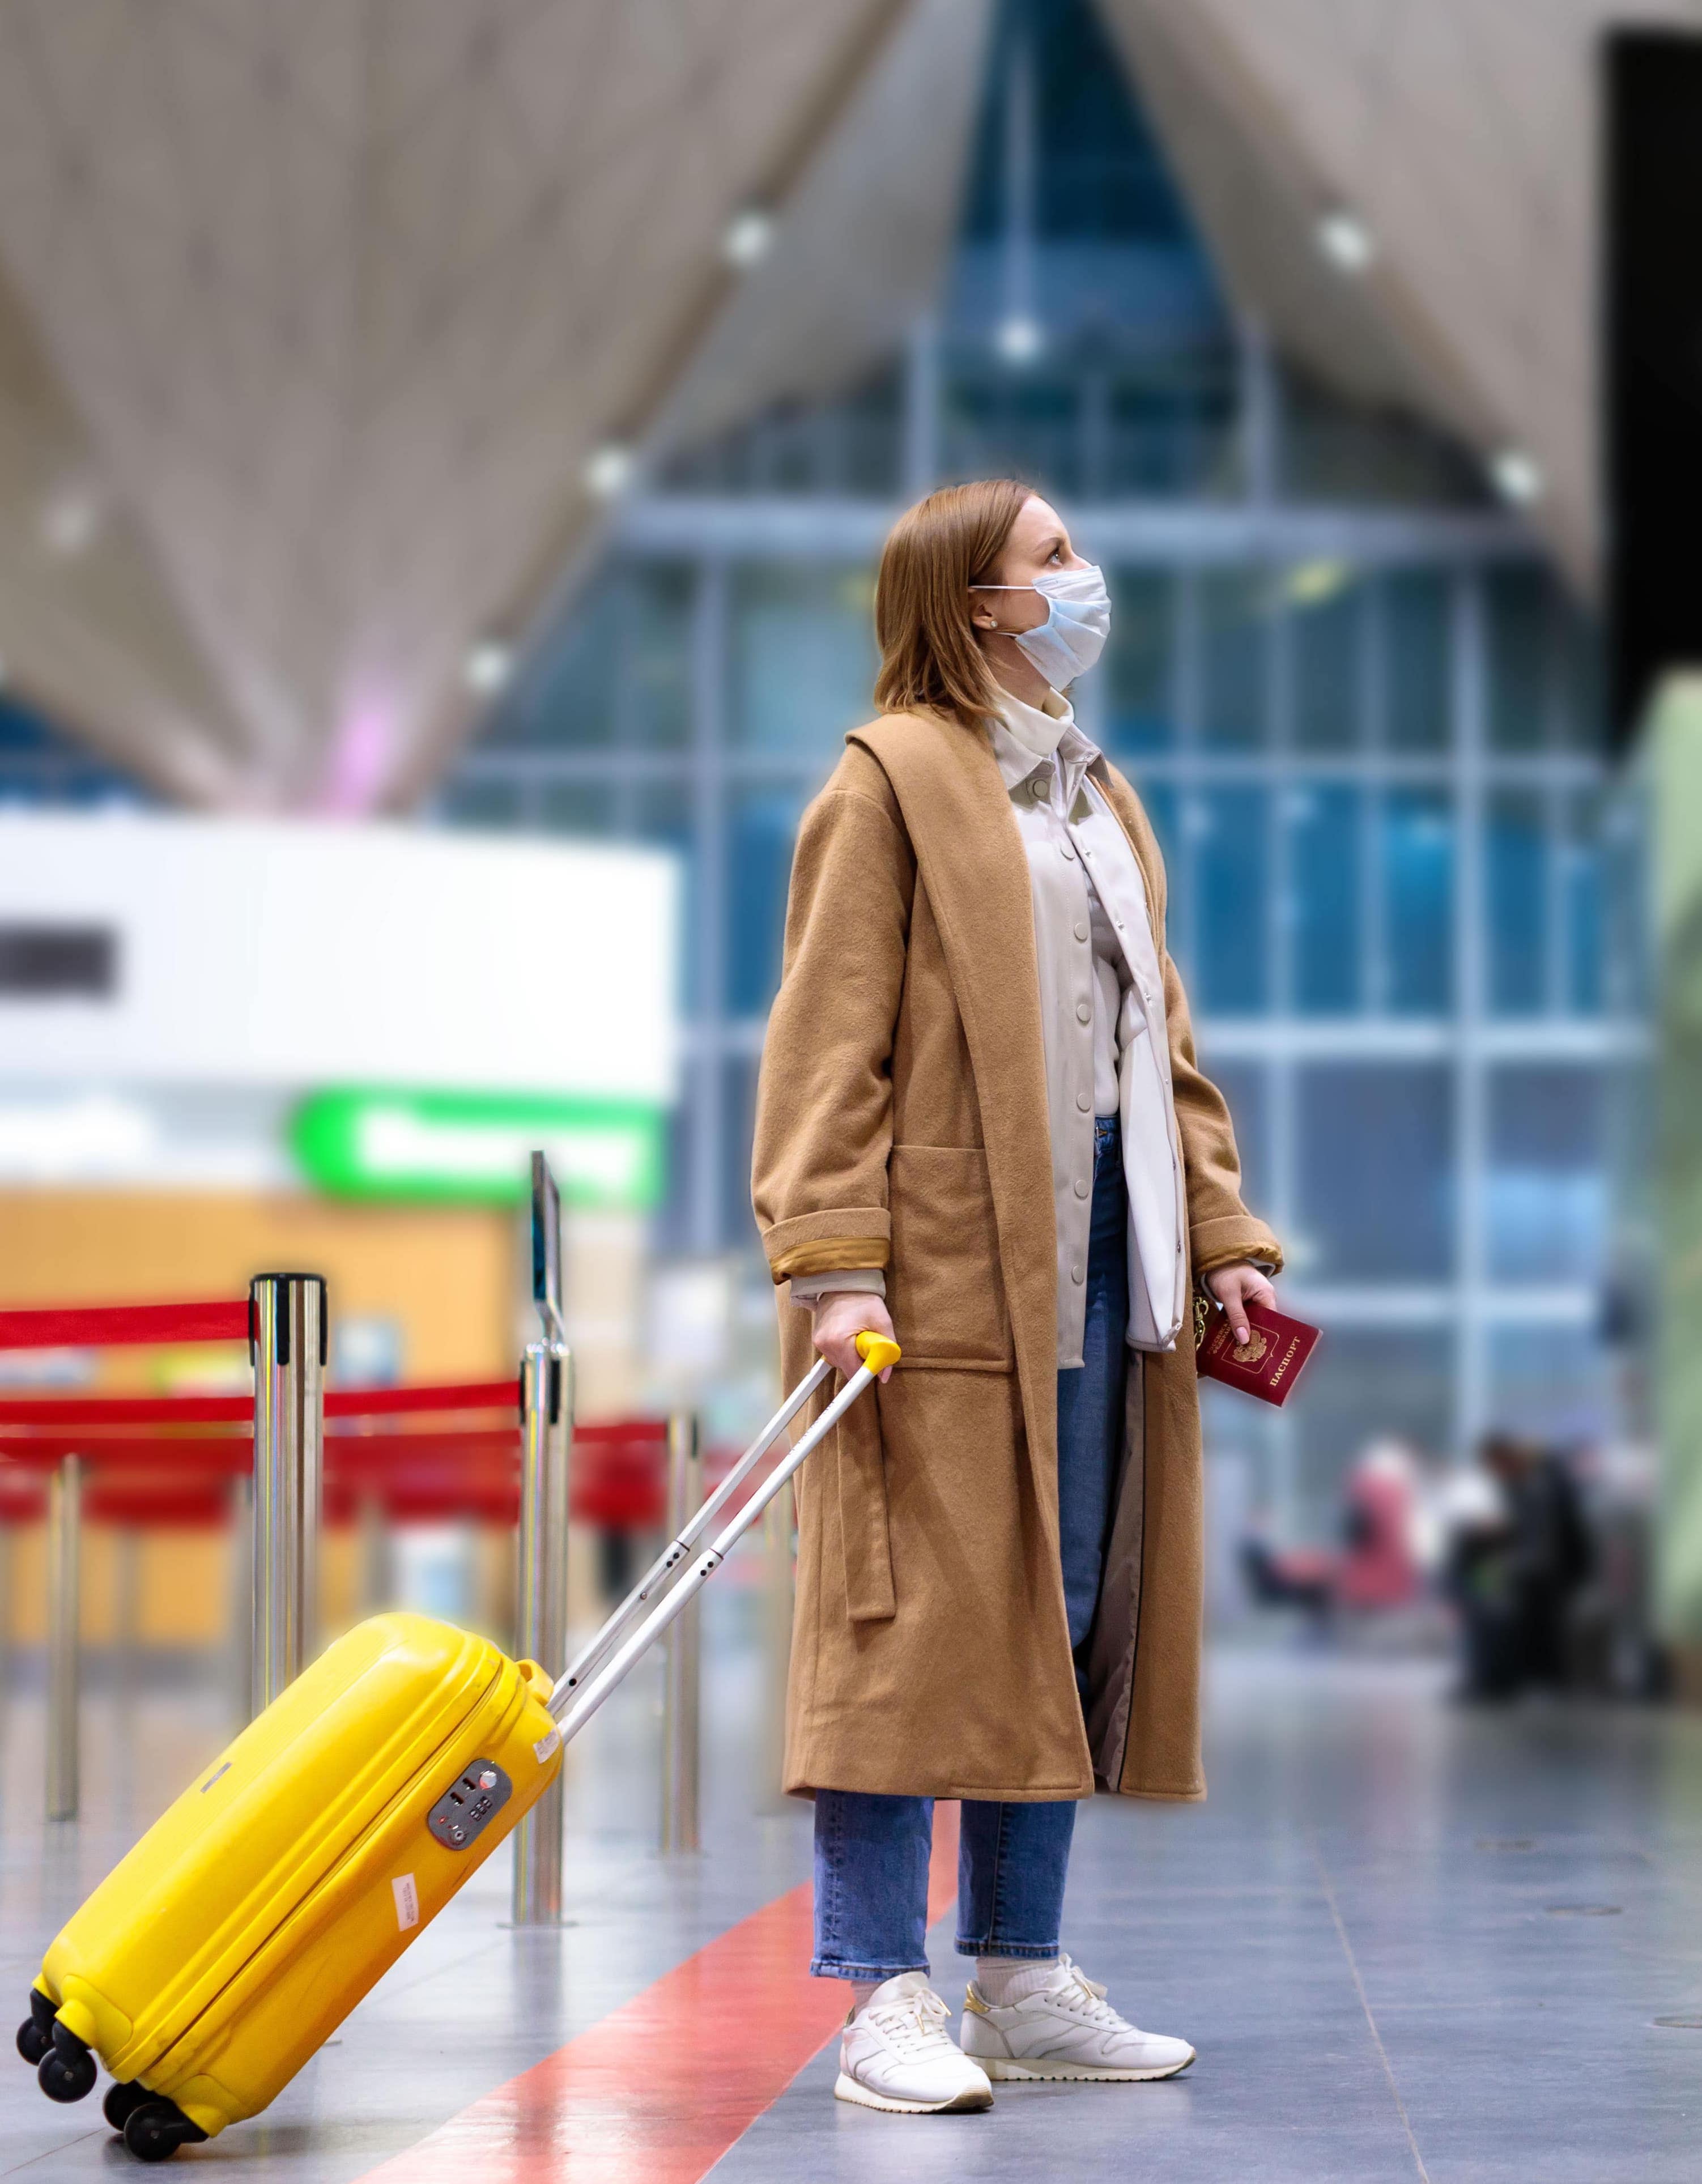 Woman in airport during Covid